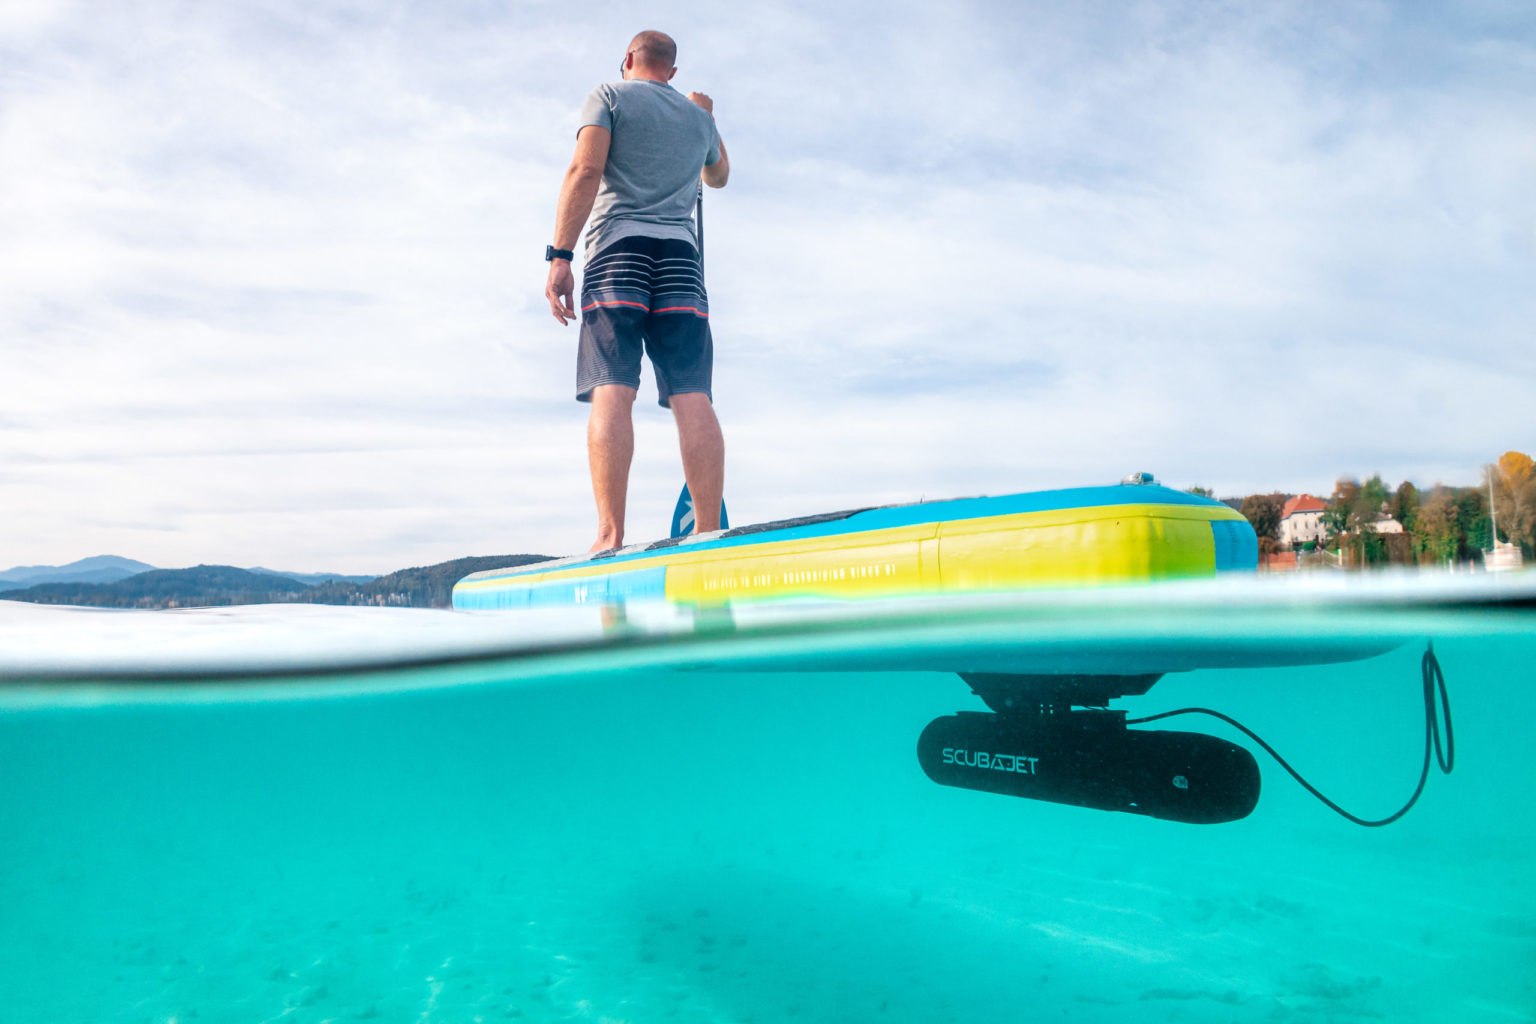 SCUBAJET’s Beginner’s Guide to Stand-Up Paddleboarding